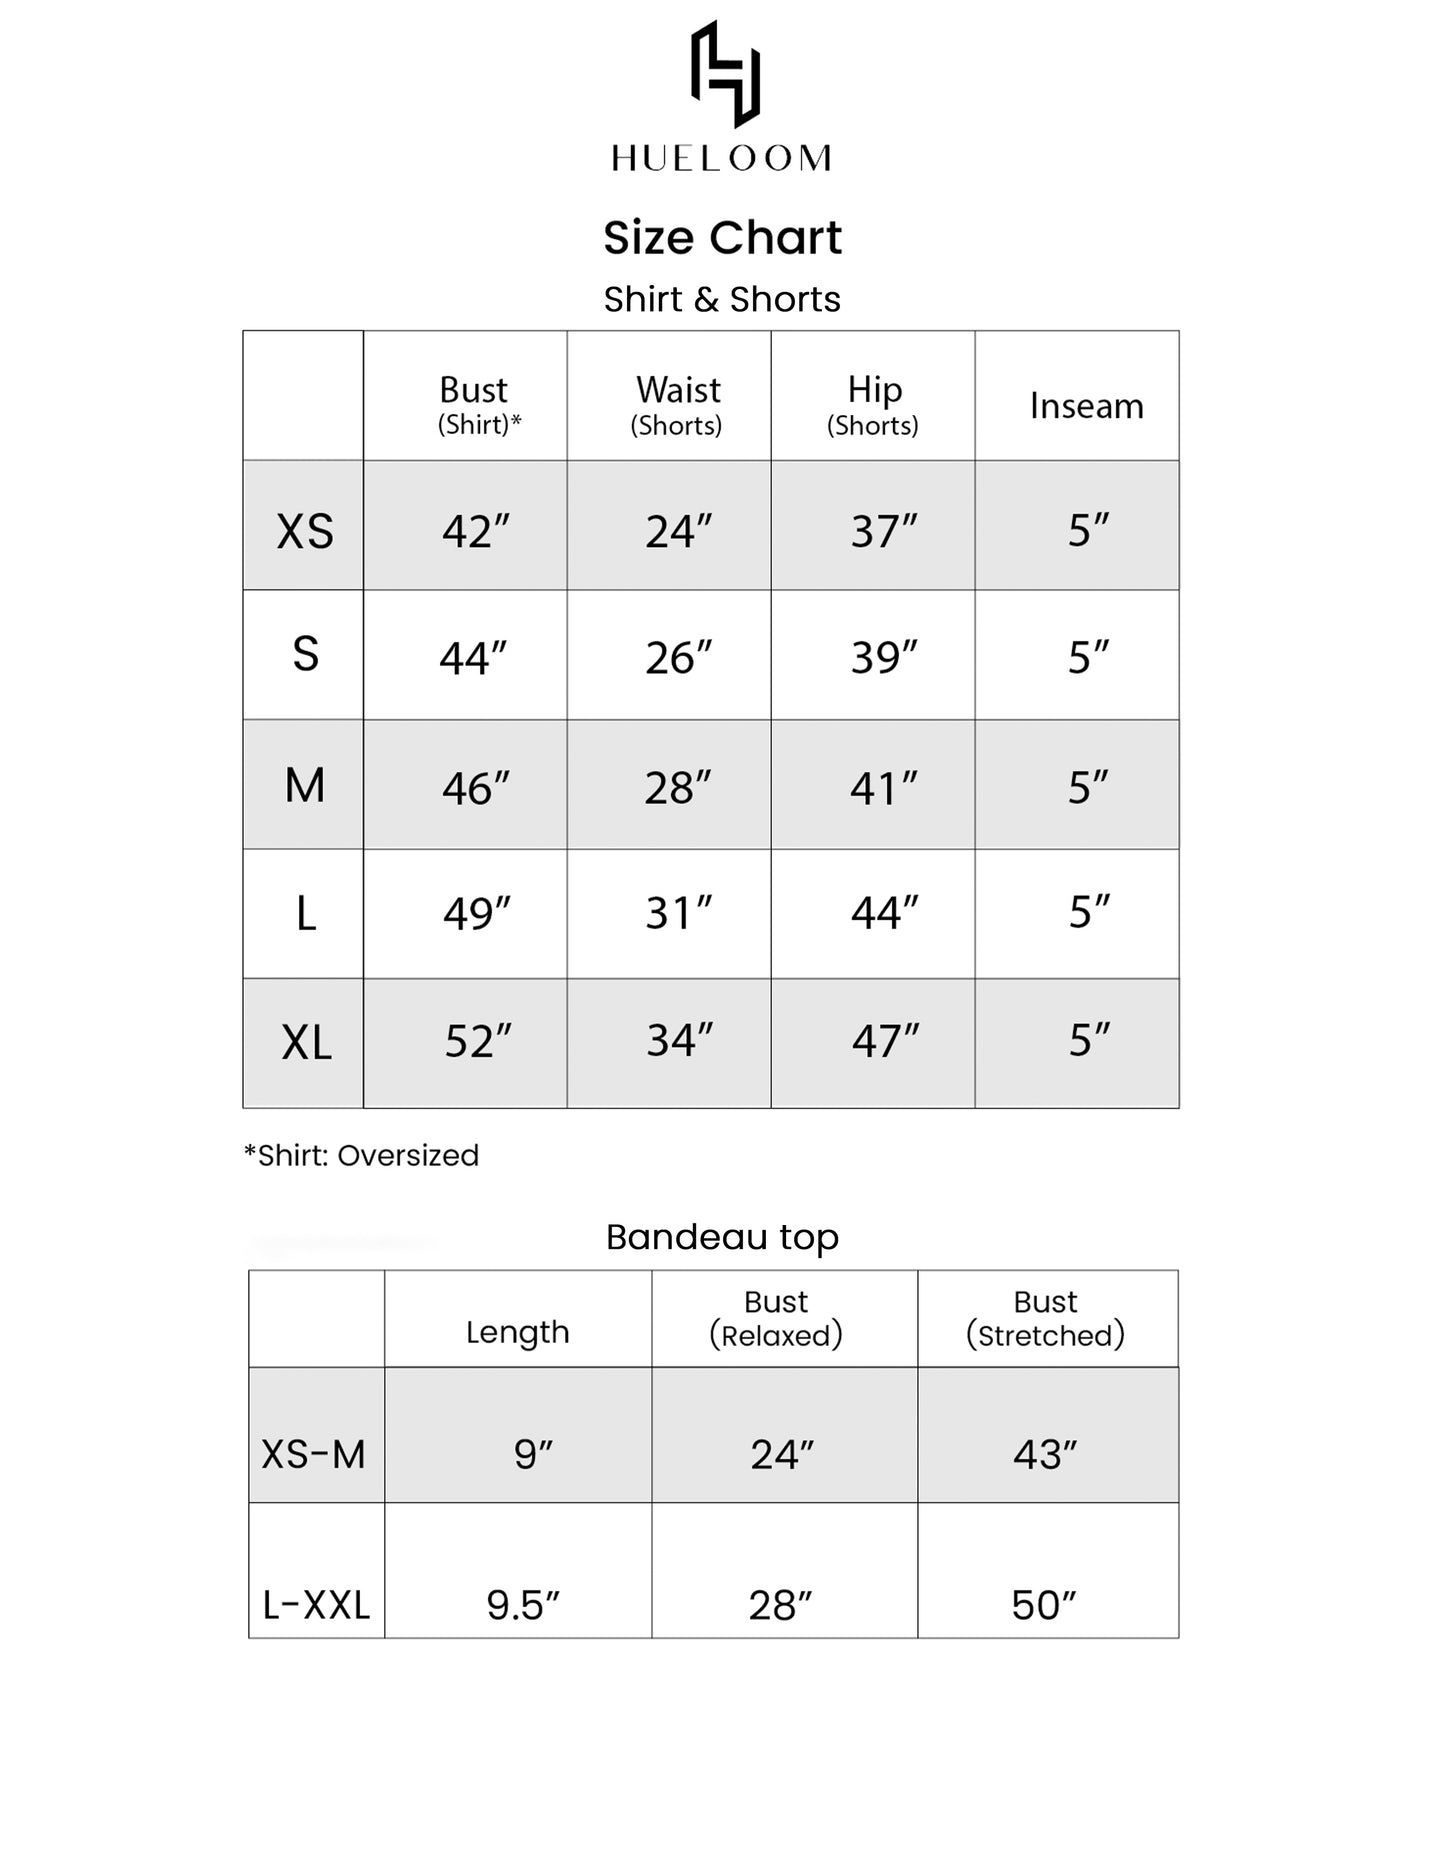 Hueloom's size chart guide for sizes XS, S, M, L, XL for the cosmopolitan convertible capsule